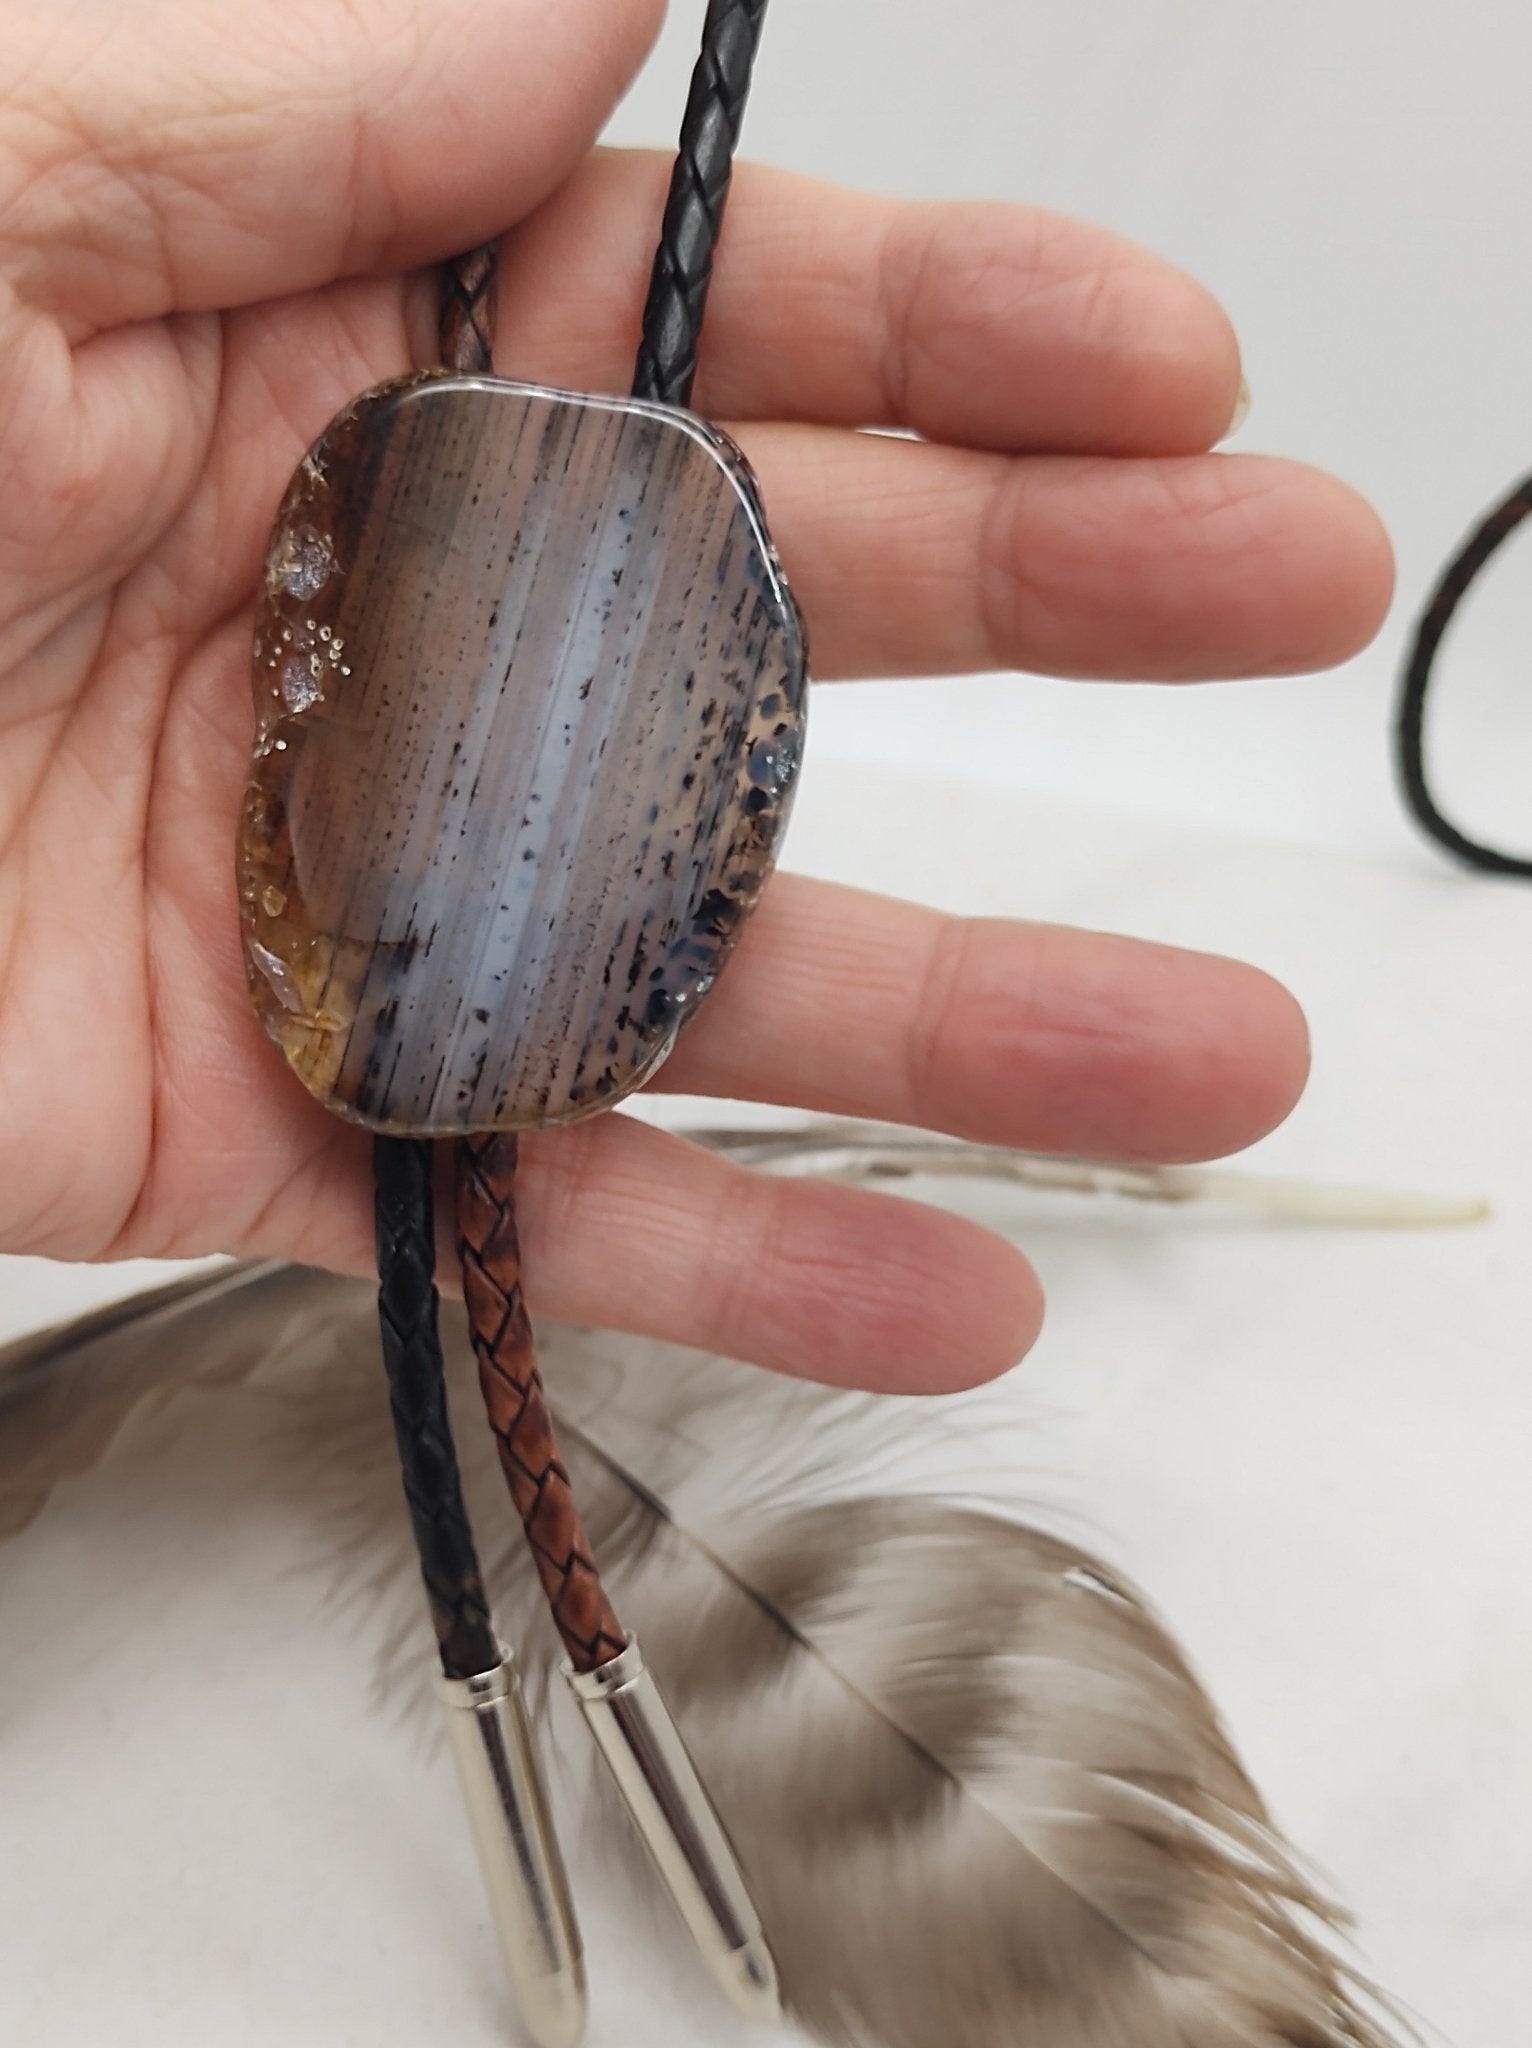 Rustic Agate Cowboy Bolo Tie with Montana Agate - Folks On The Edge